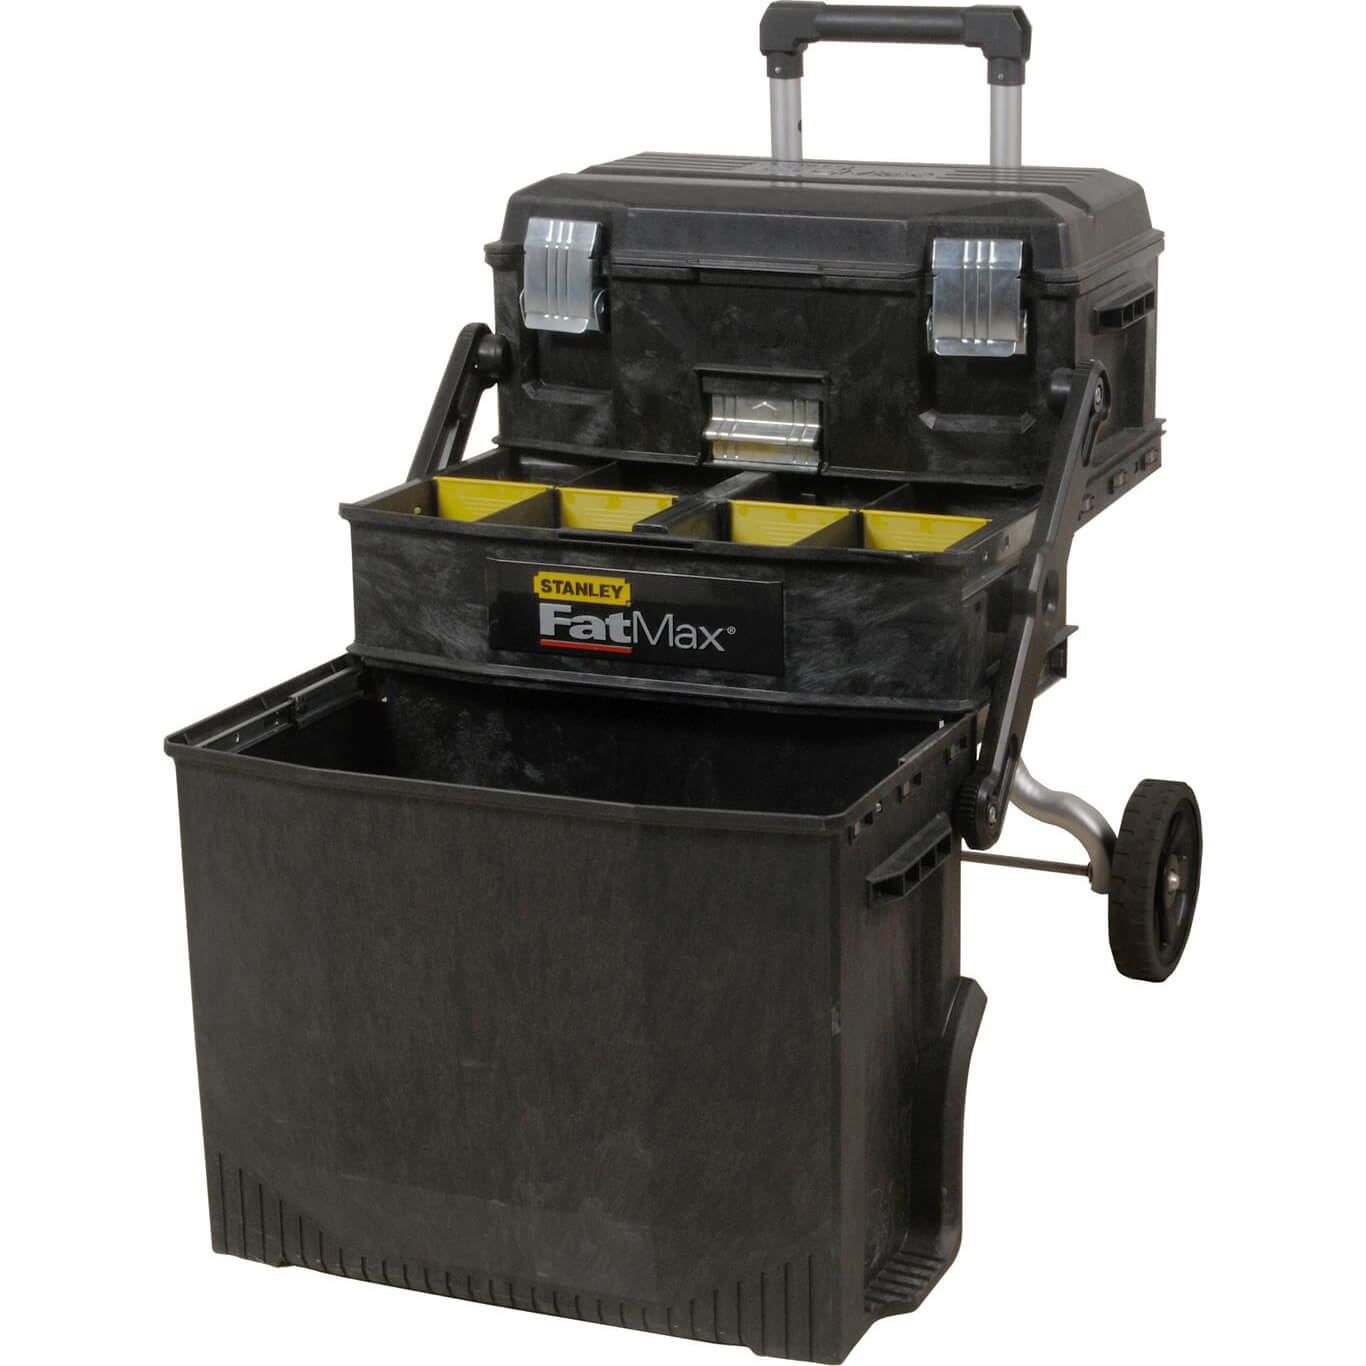 Image of Stanley FatMax Rolling Cantilever Workshop Tool Box Stack